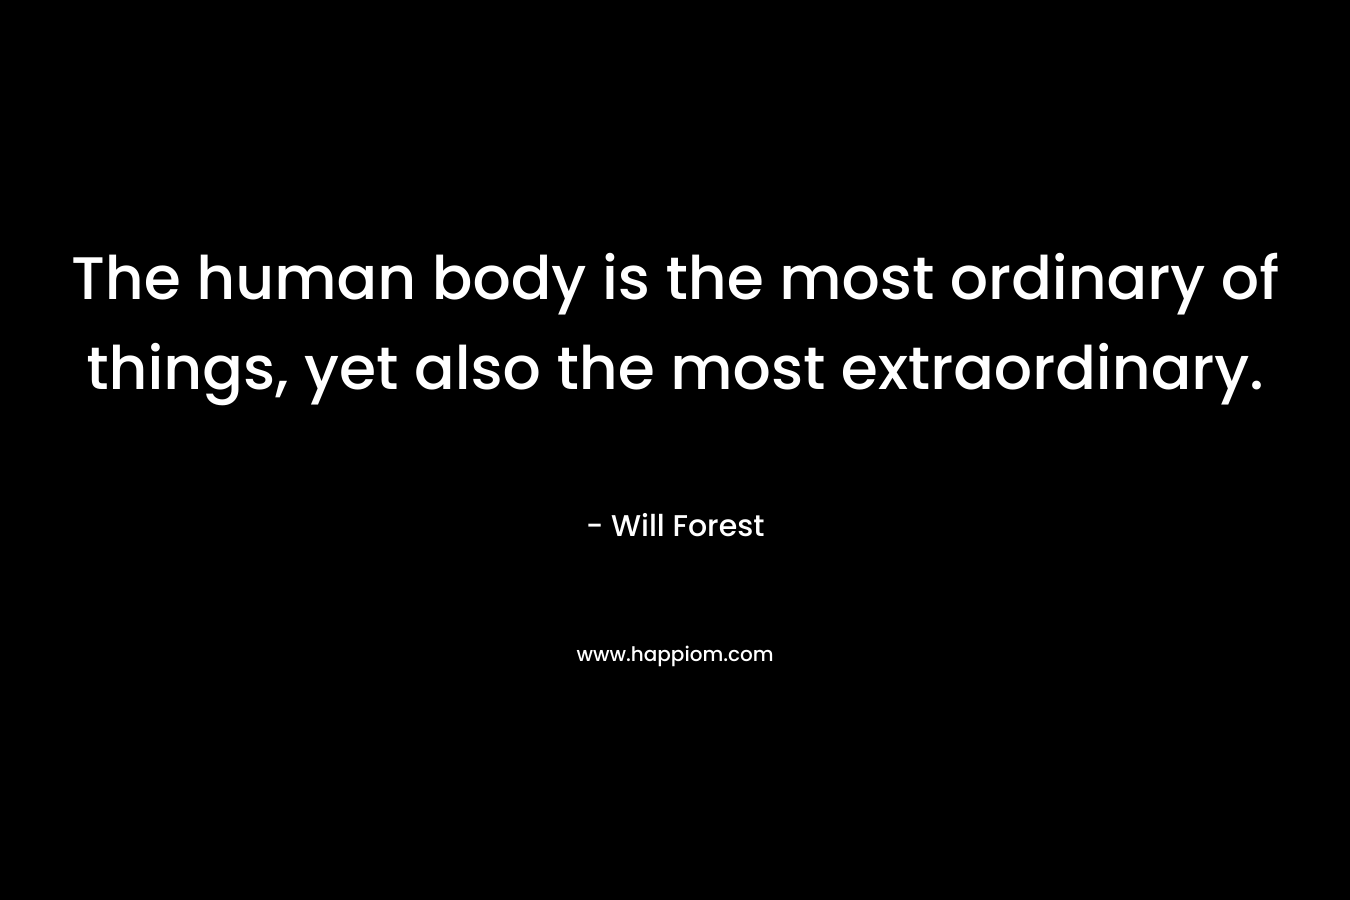 The human body is the most ordinary of things, yet also the most extraordinary.